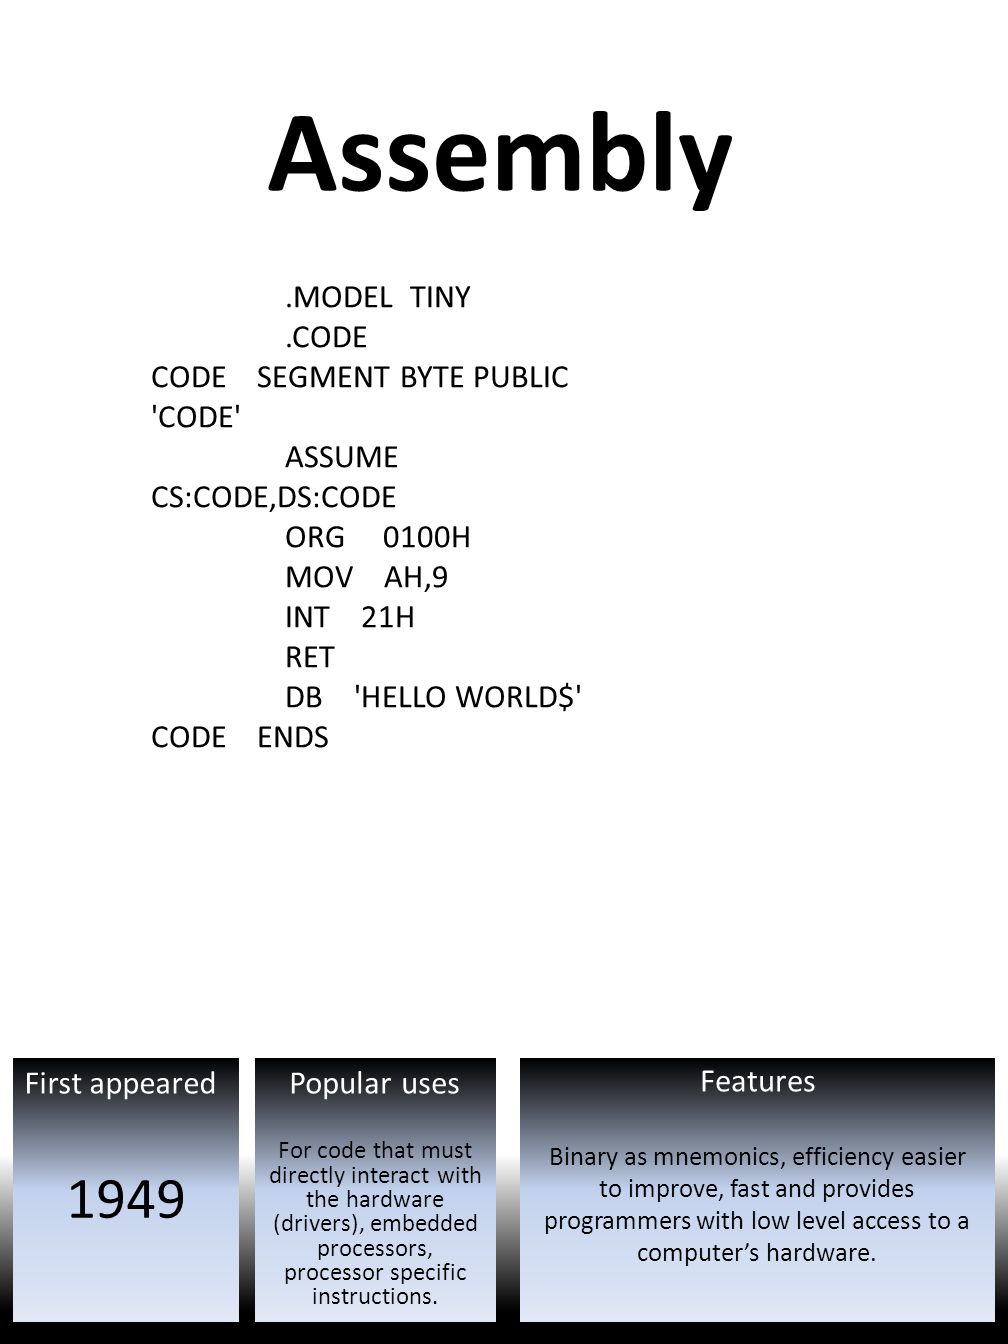 First appeared Features Popular uses Assembly 1949 For code that must directly interact with the hardware (drivers), embedded processors, processor specific instructions.